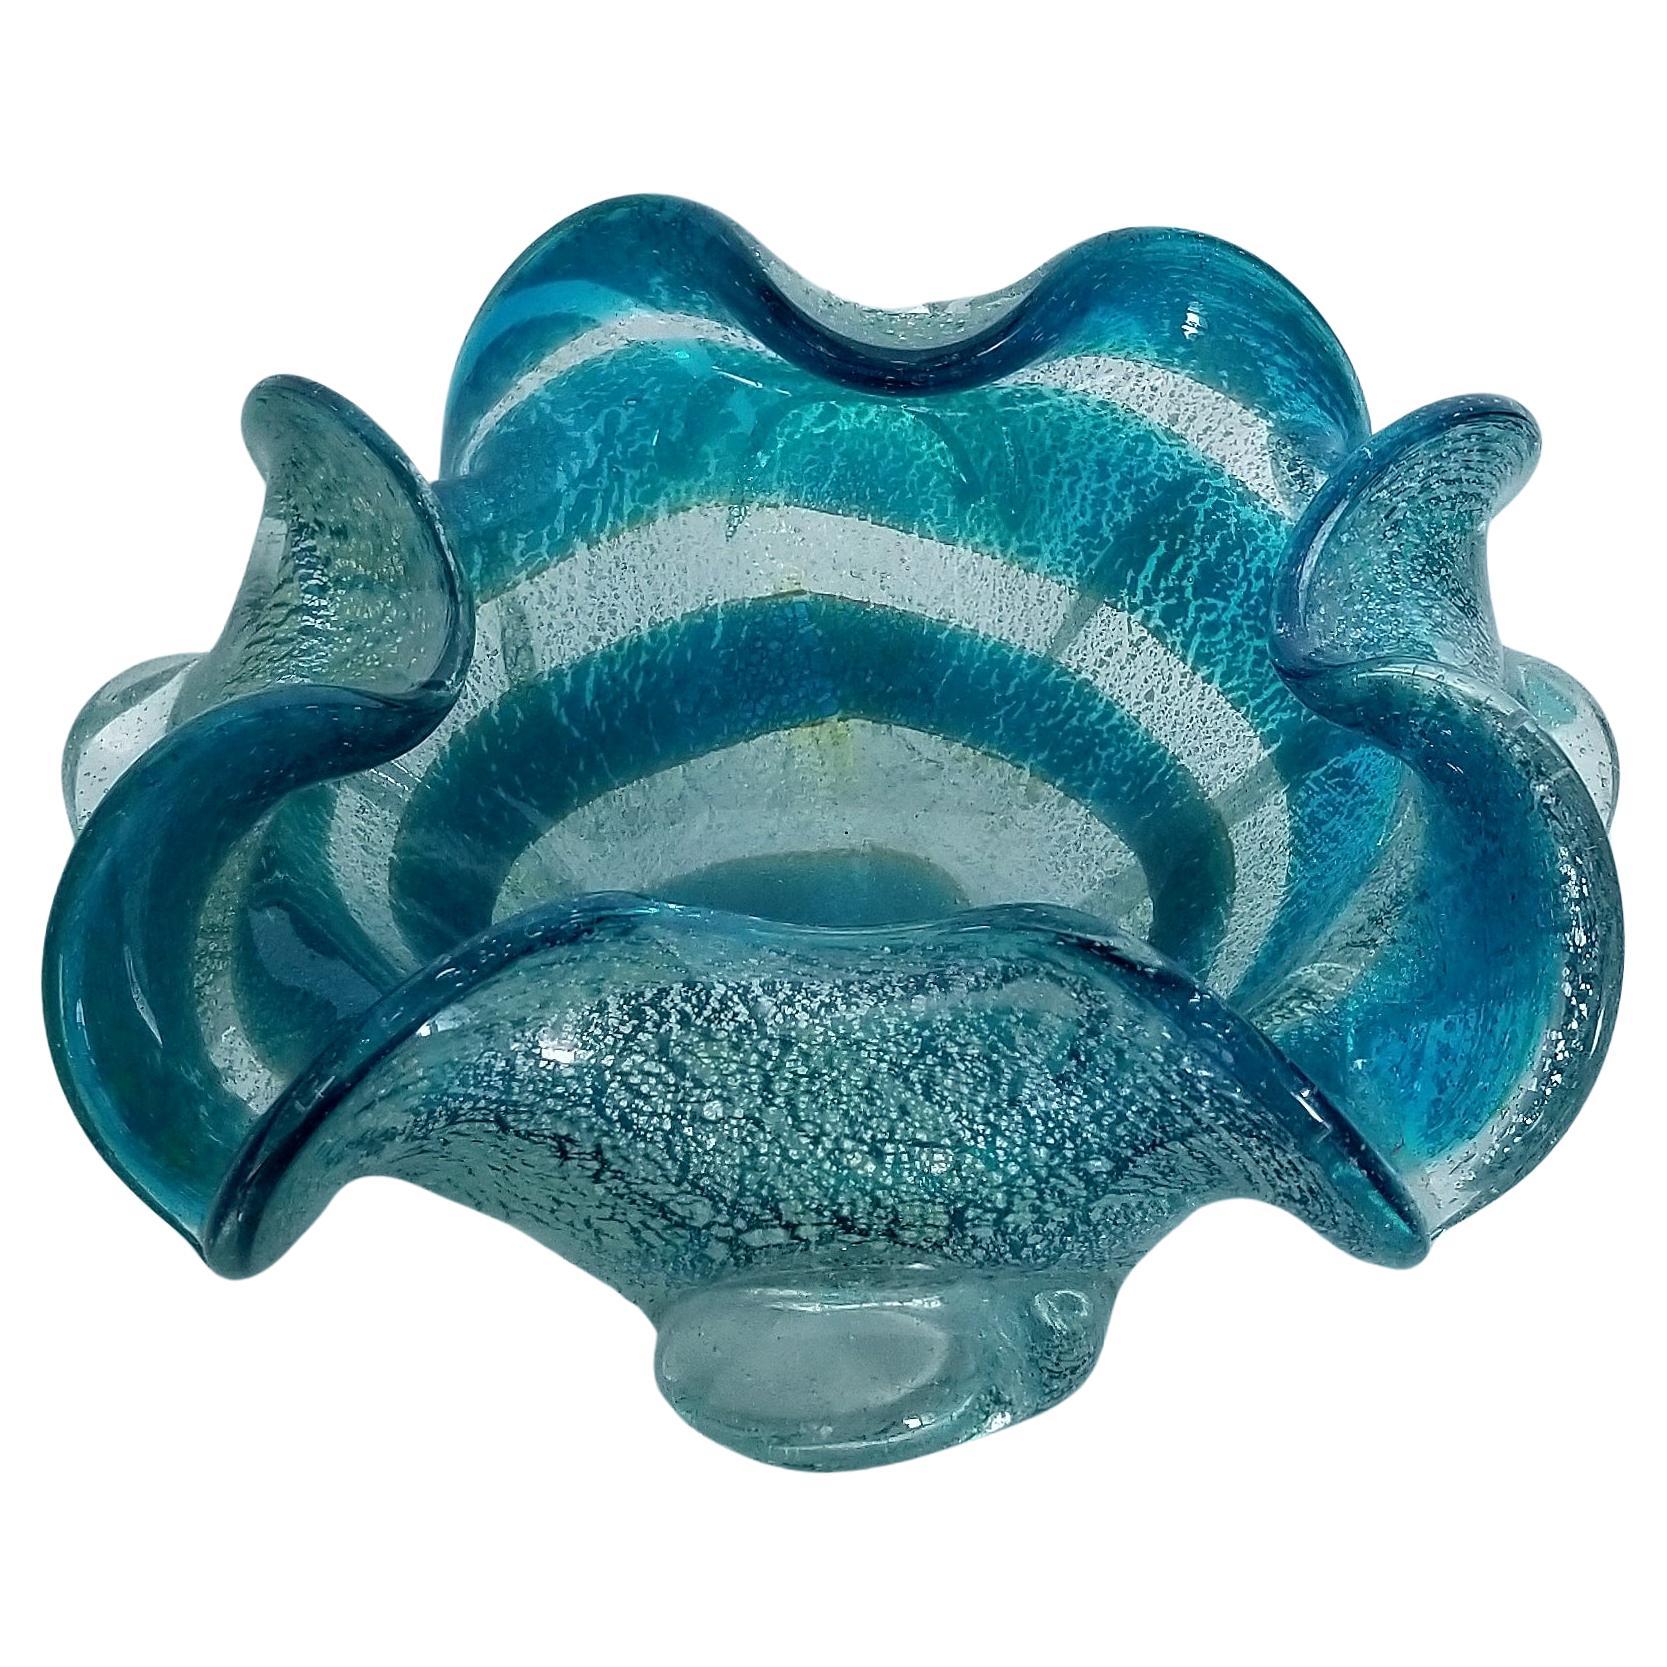 Blue and Silver Murano Glass Ashtray or Catch-all Bowl For Sale 3